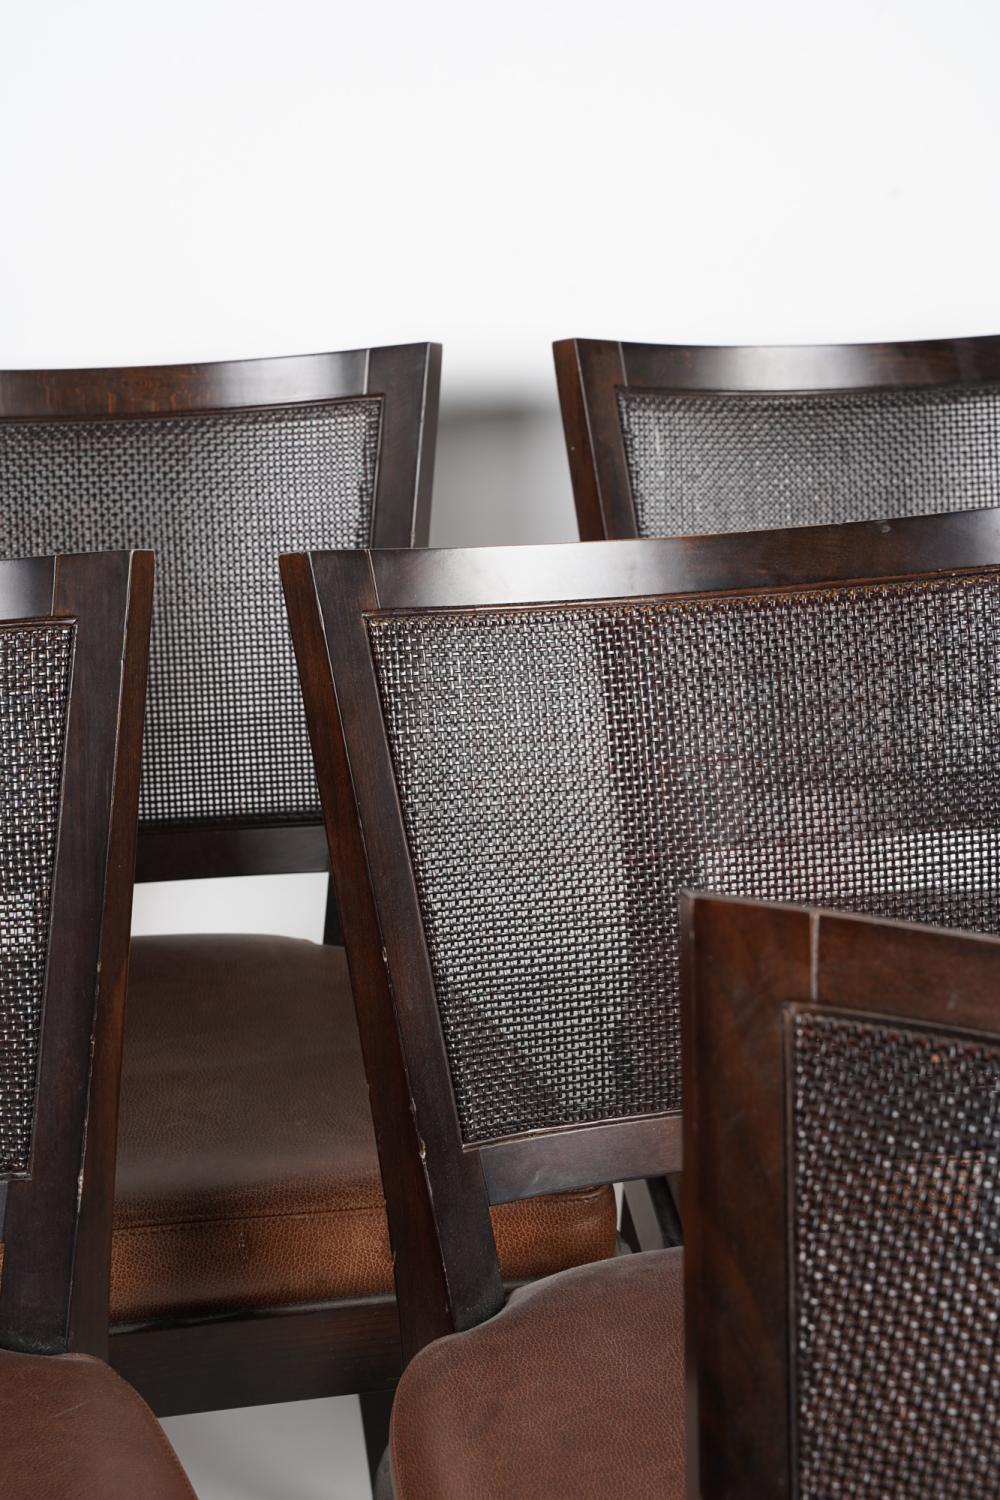 Hand-Crafted Set Six Promemoria Caffe Caned Leather Dining Chairs Contemporary Italian C 2000 For Sale